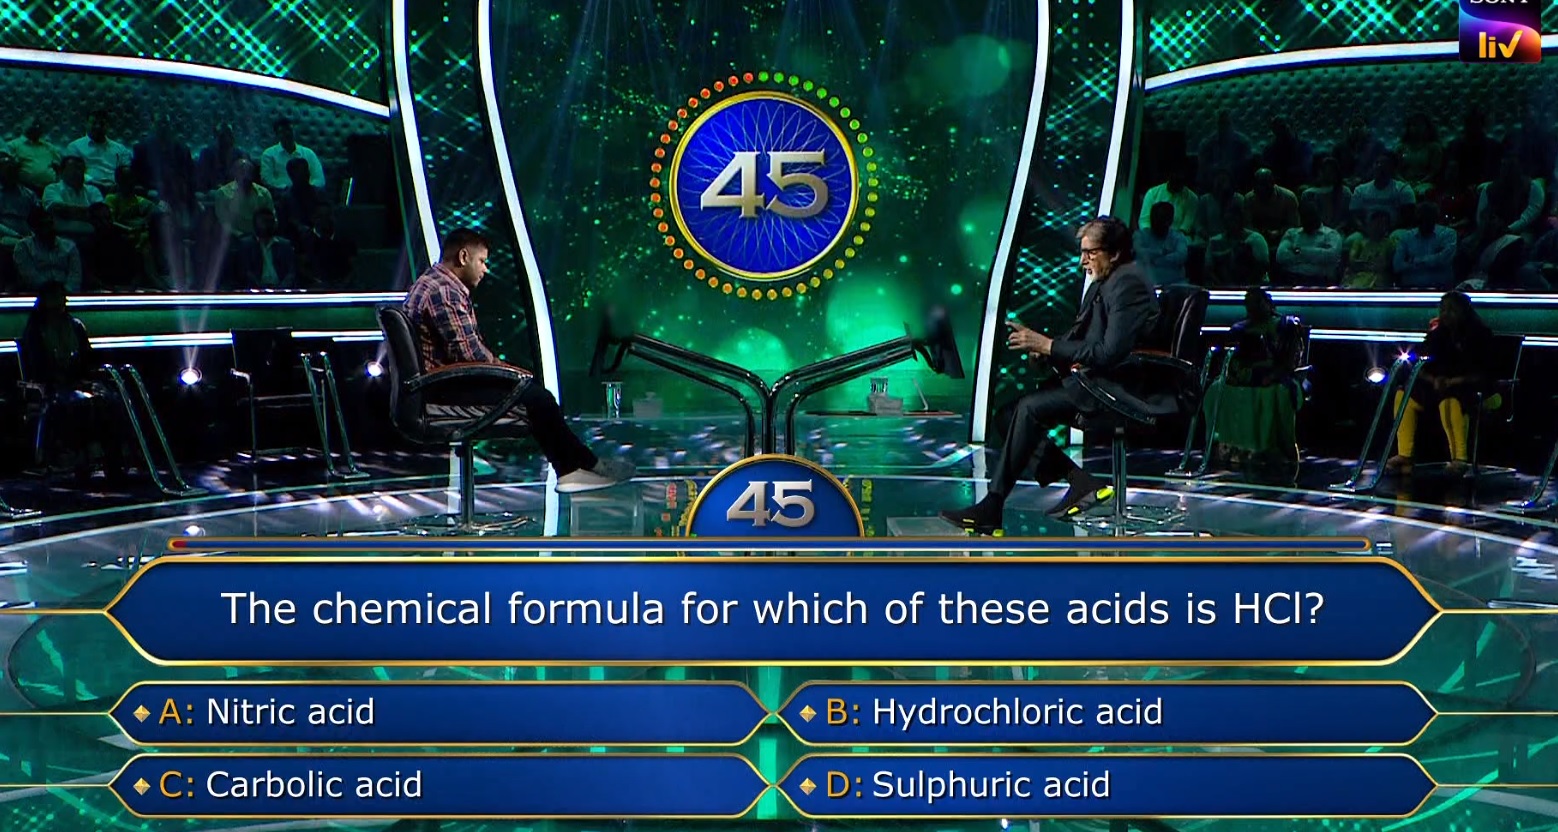 Ques : The Chemical formula for which of these acids is HCL?